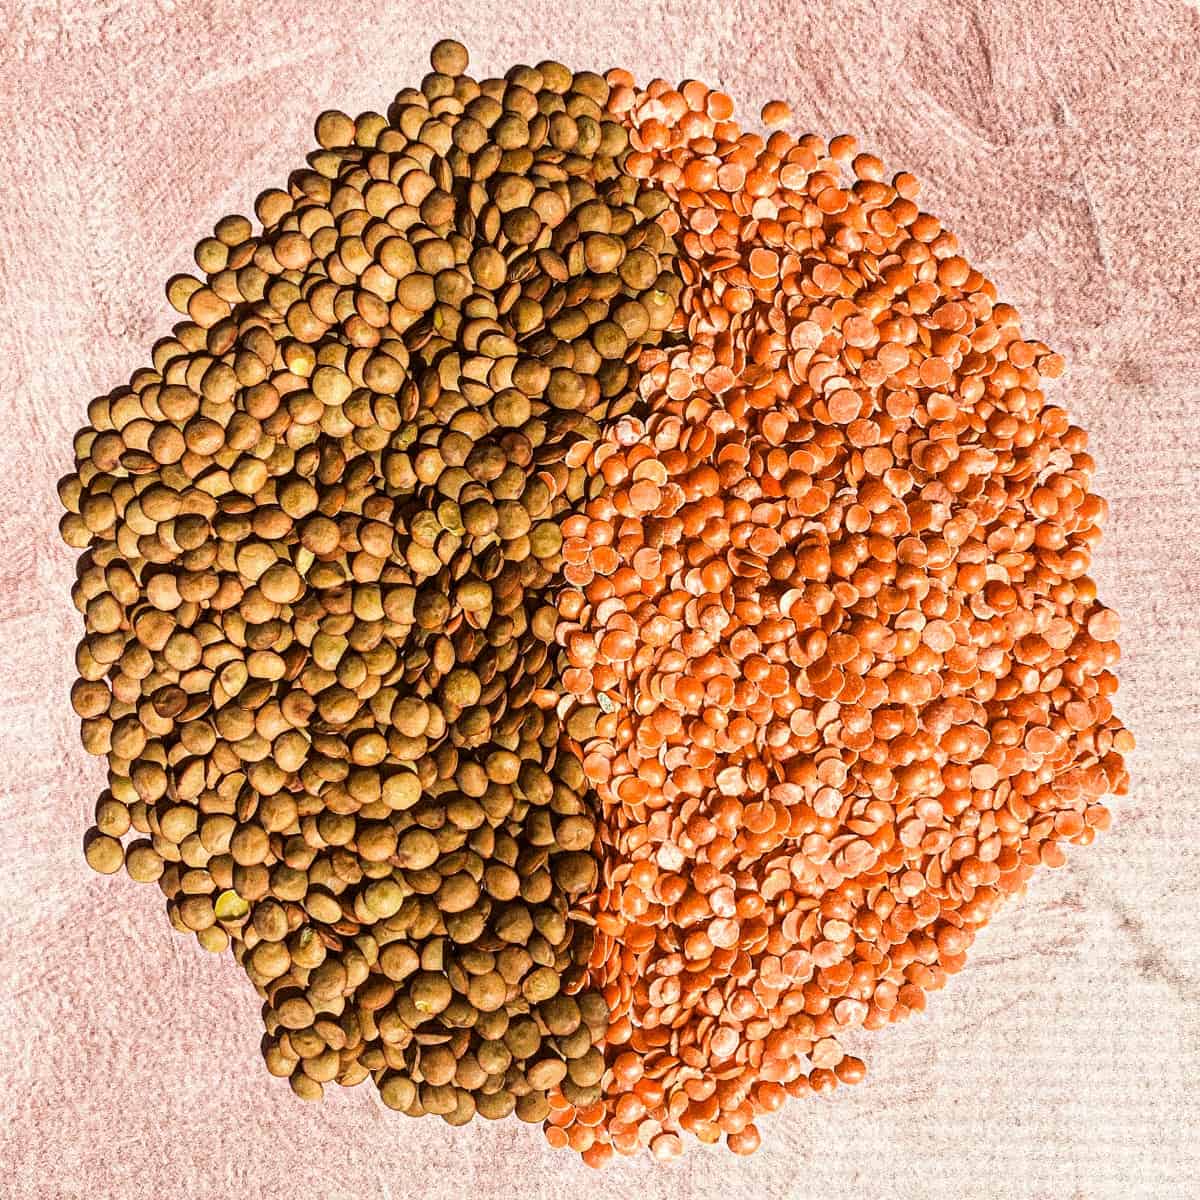 Whole masoor dal on the left and split and hulled masoor dal (aka red lentil) on the right.